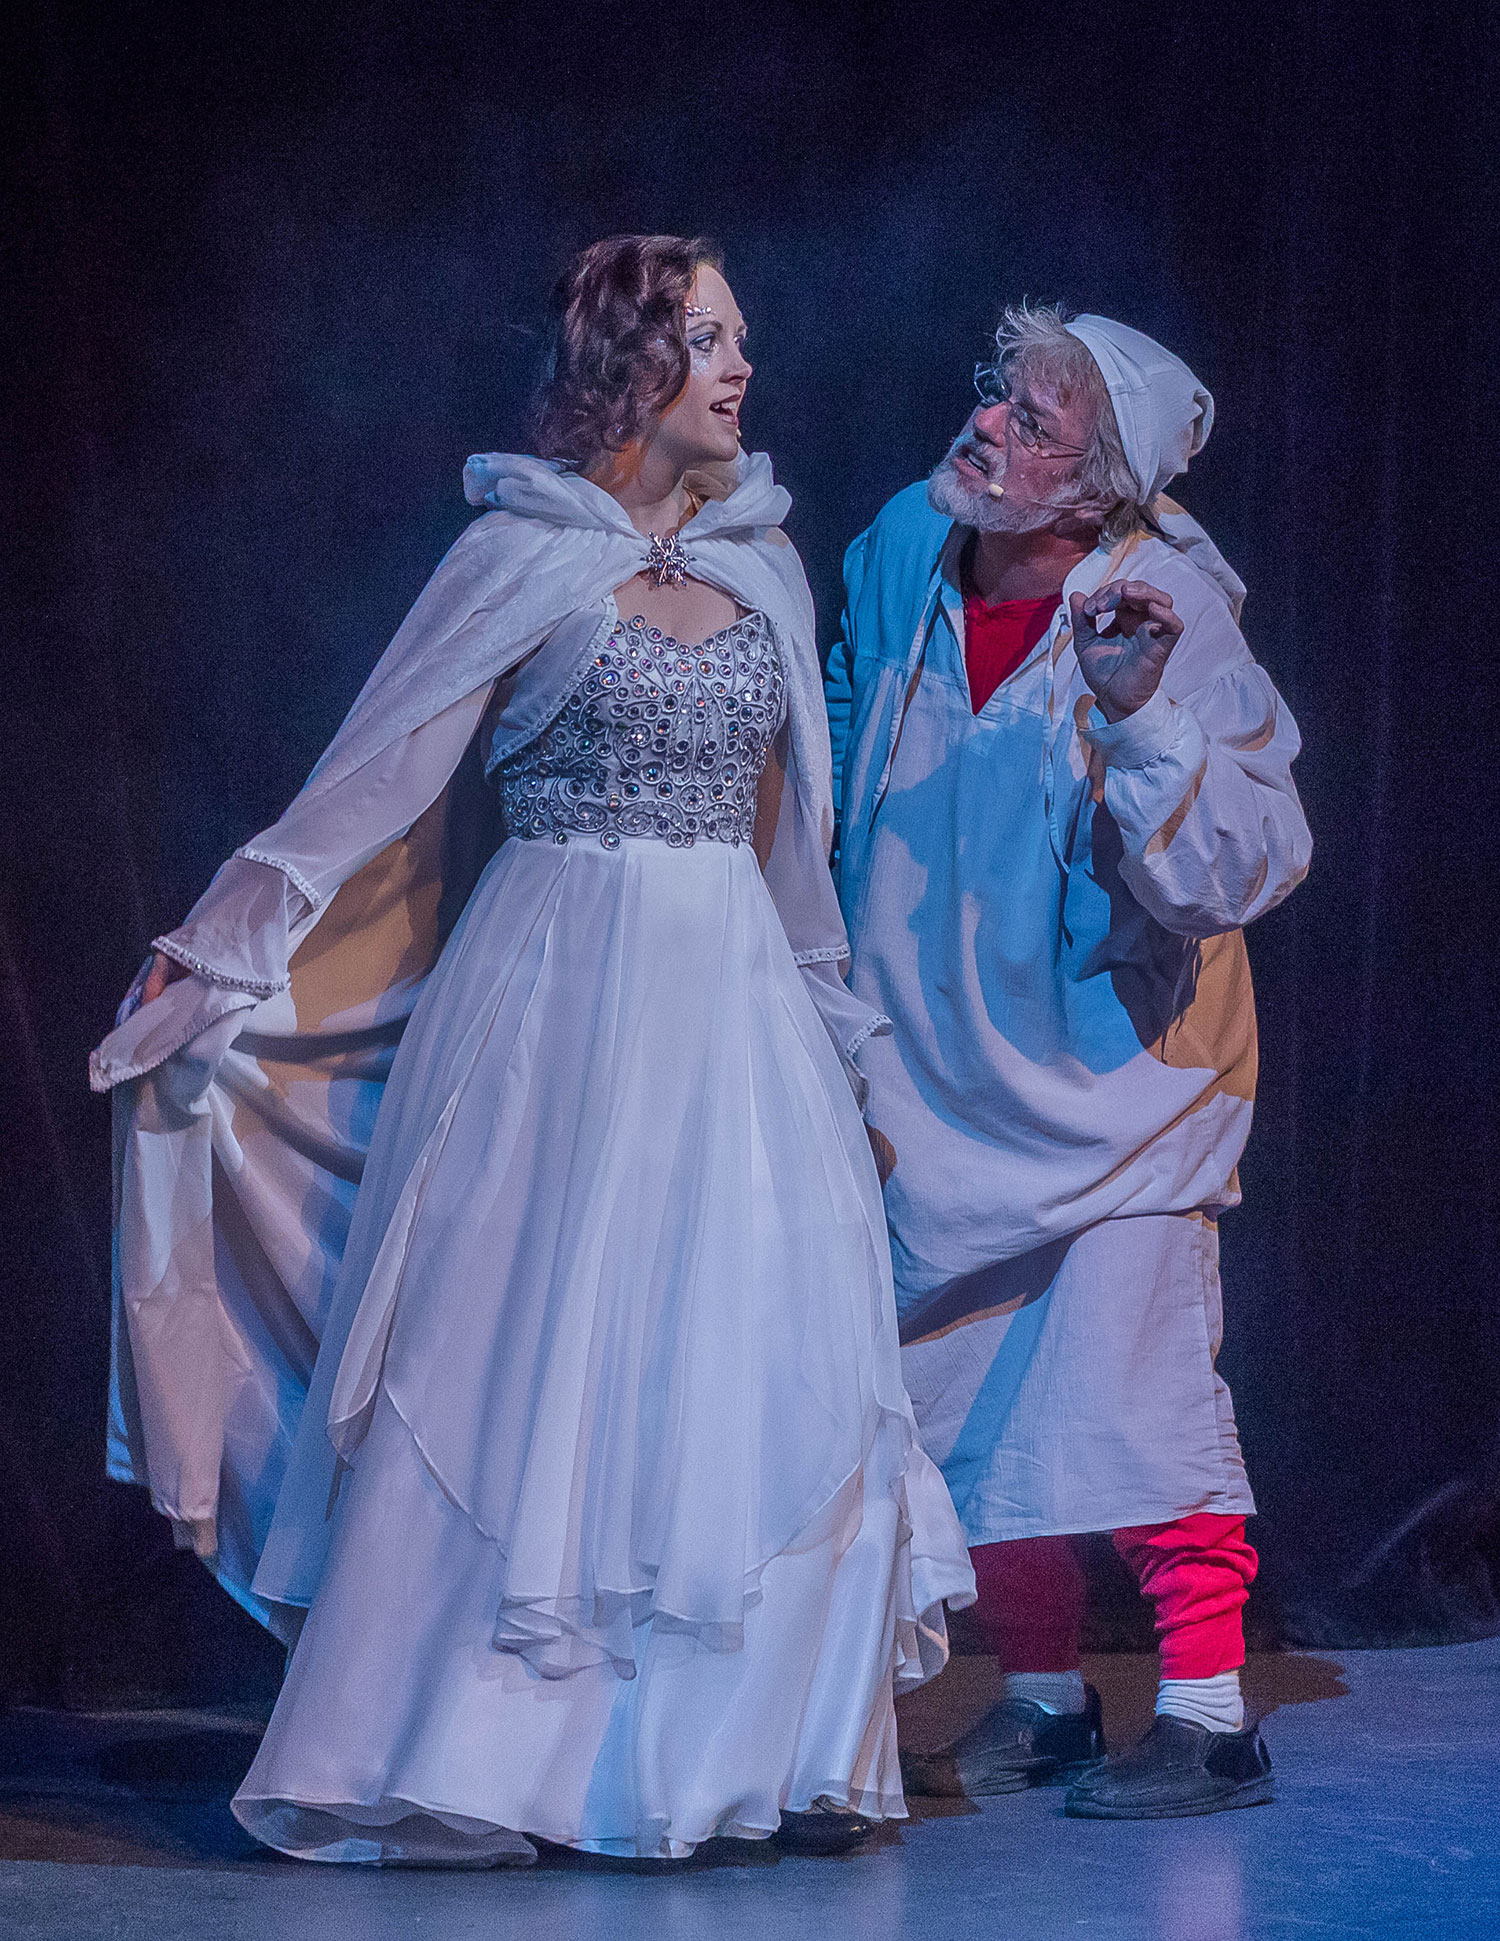 Deanna Green and Darrell Rodenbaugh in a previous year's production of "Scrooge the Musical" // AKA Photography